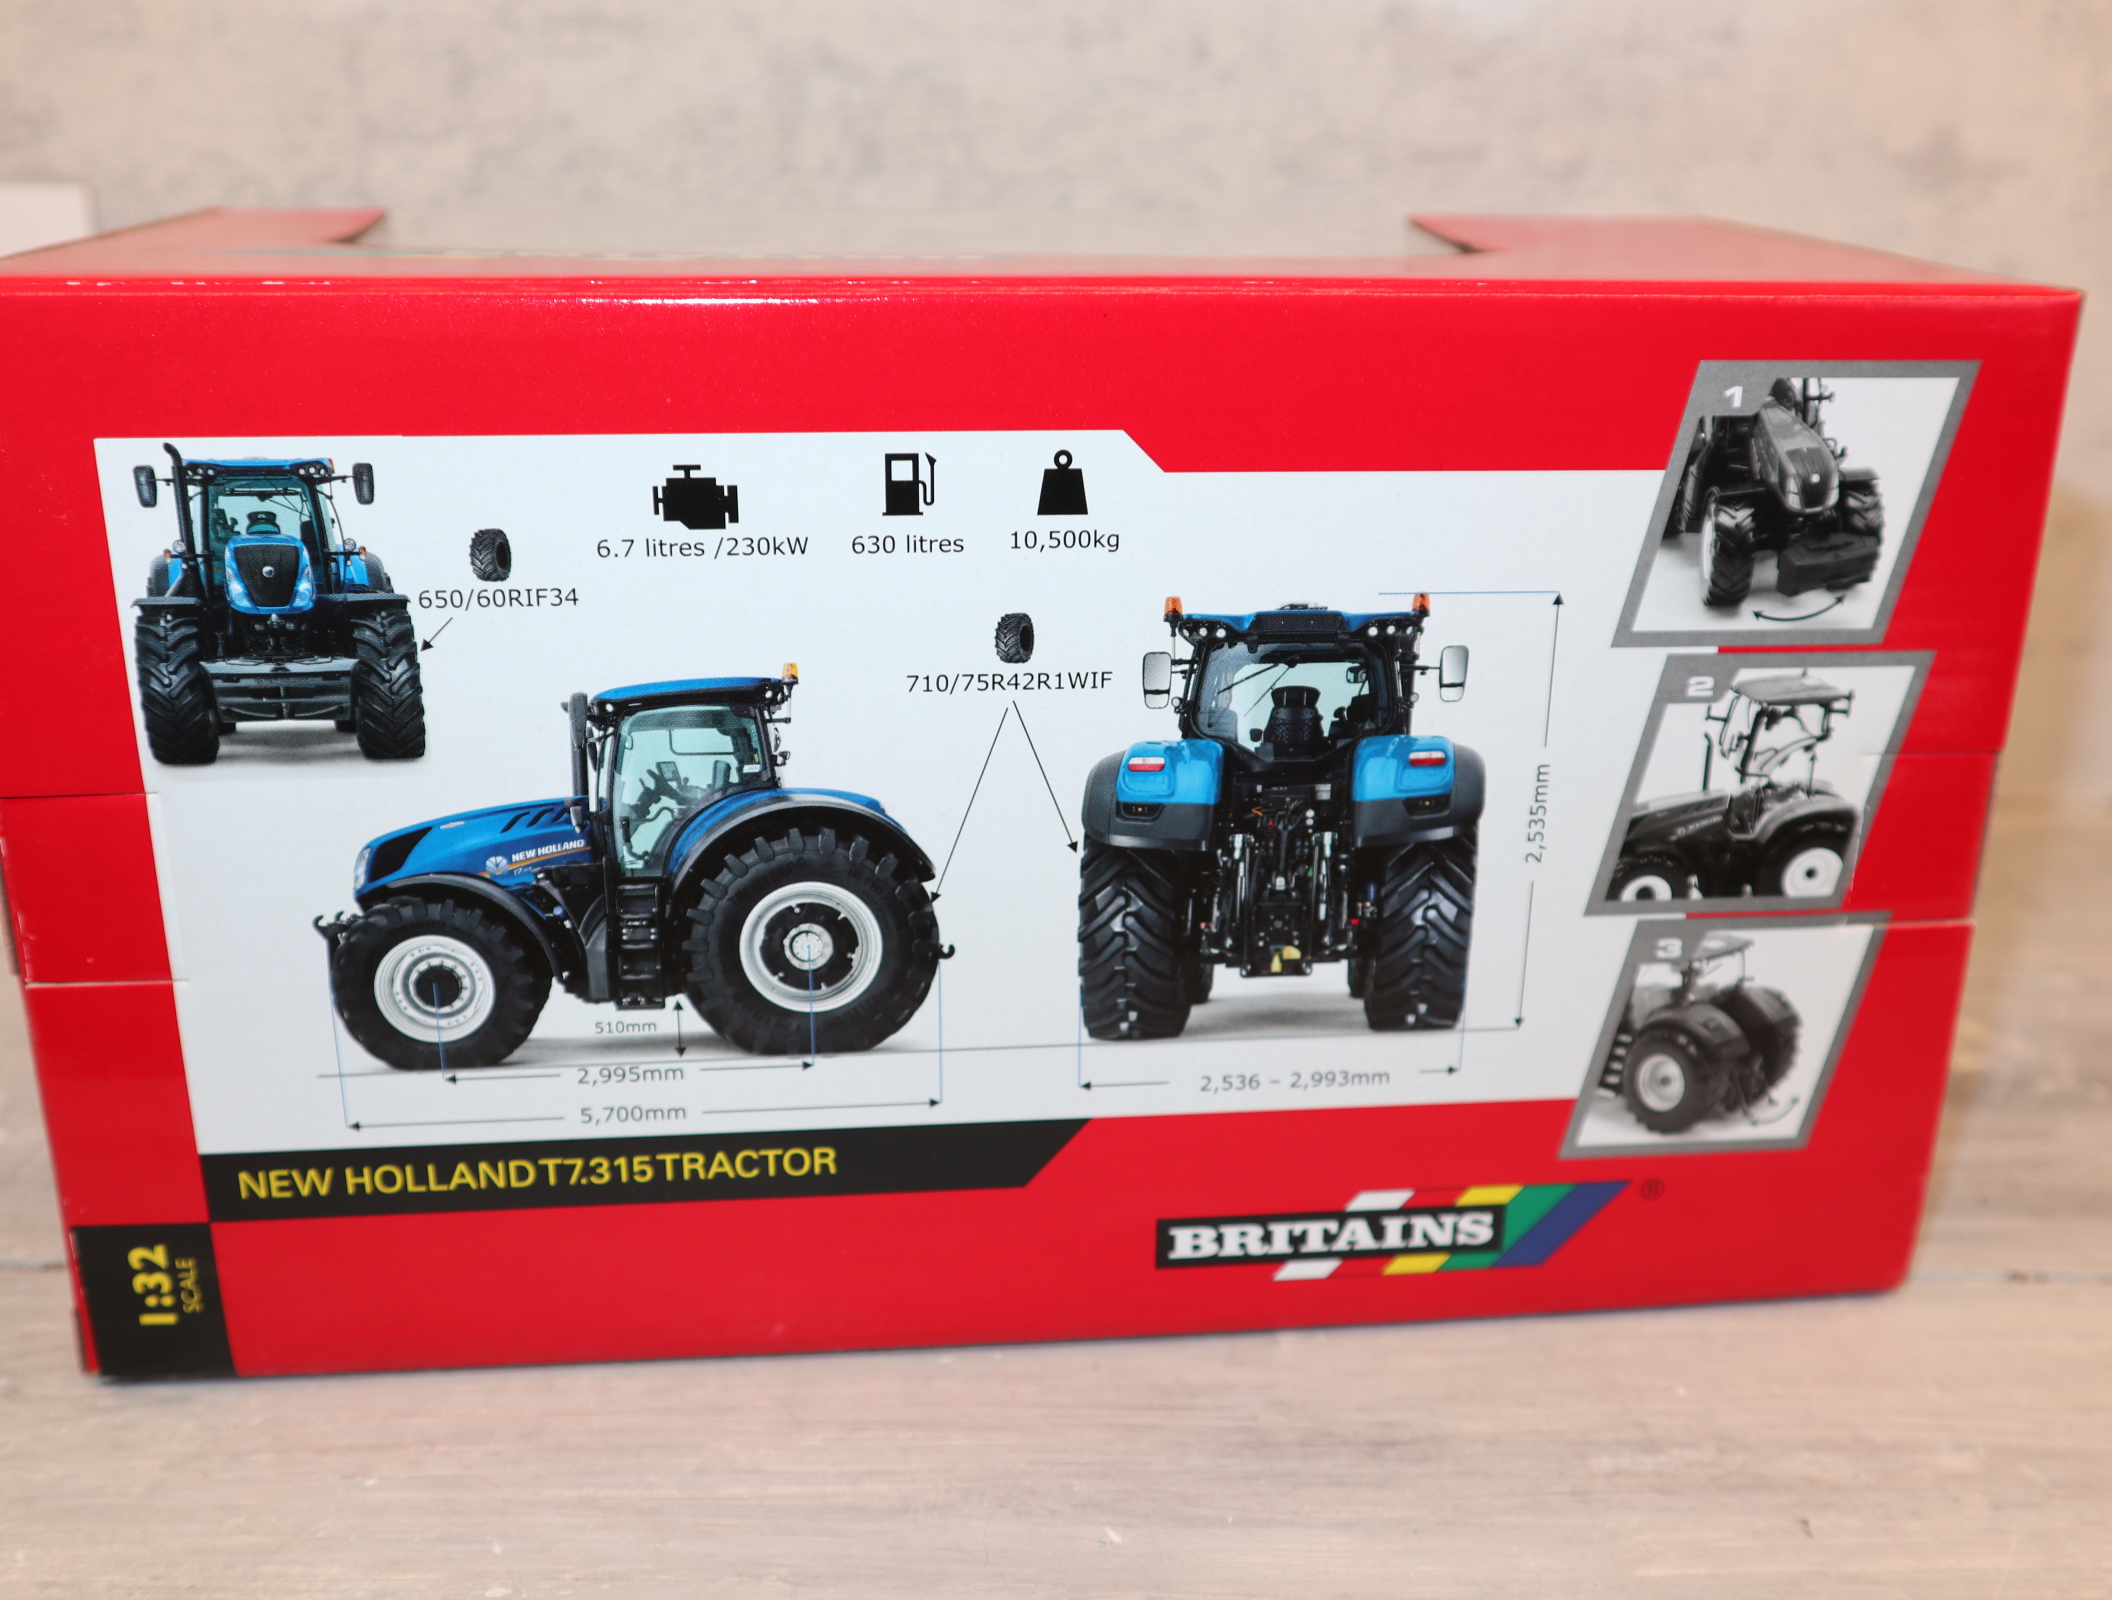 Britains 43149 in 1:32 New Holland T7.315, NEU in OVP